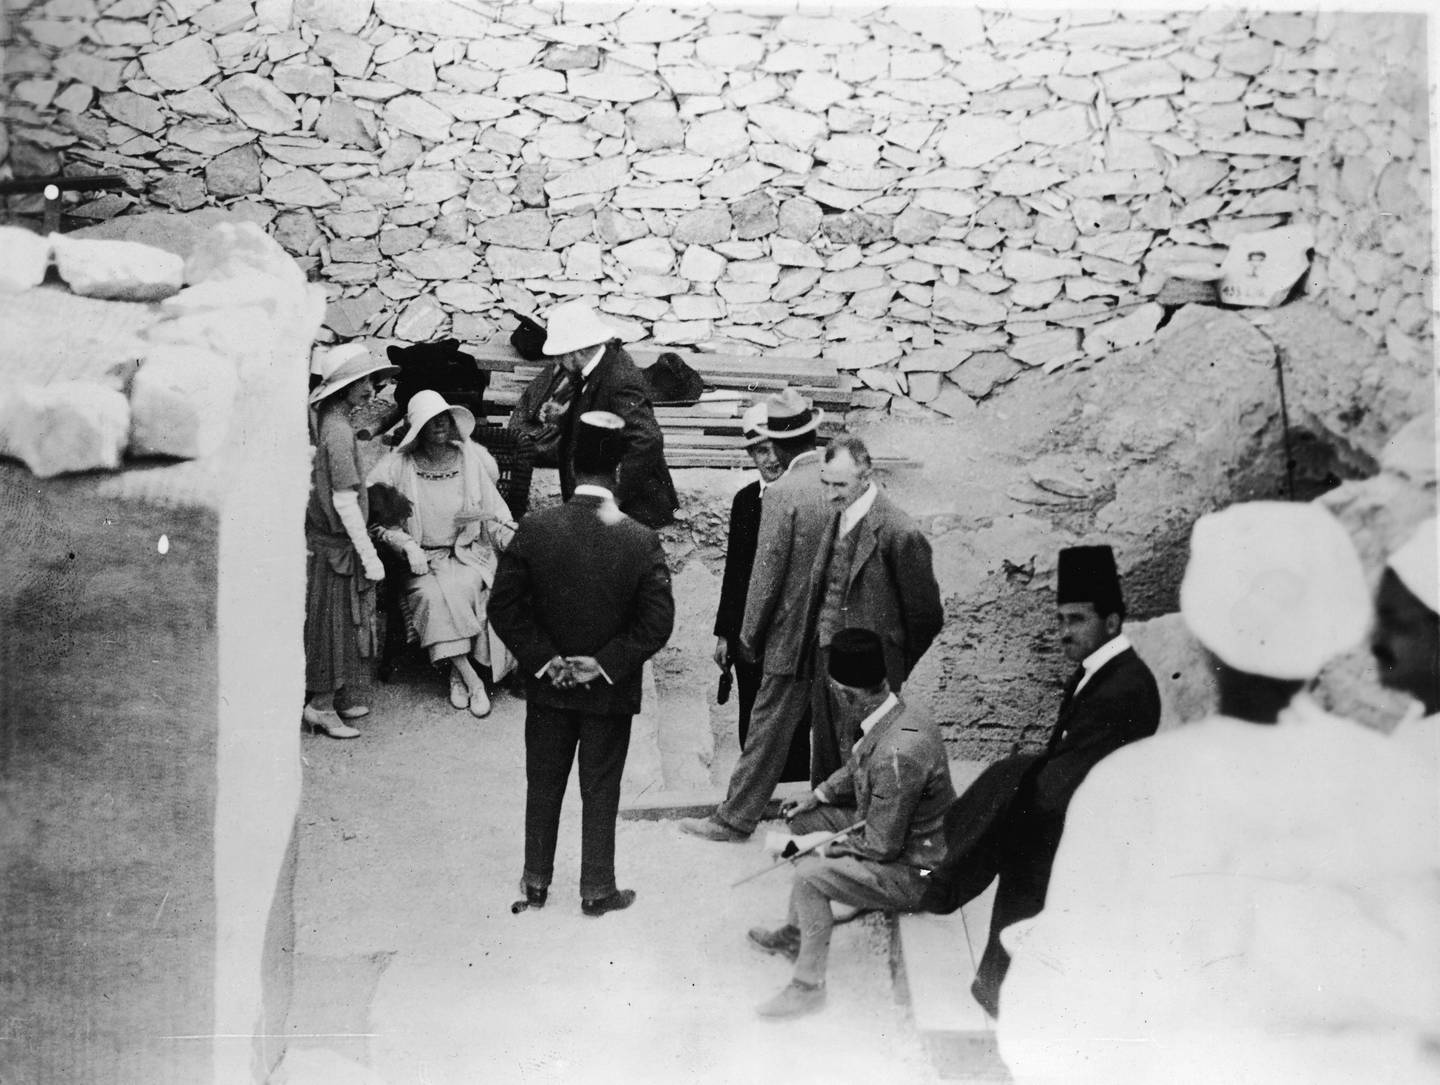 Queen Elisabeth of Belgium, seated, at the tomb of Pharaoh Tutankhamun on February 18, 1923. Getty